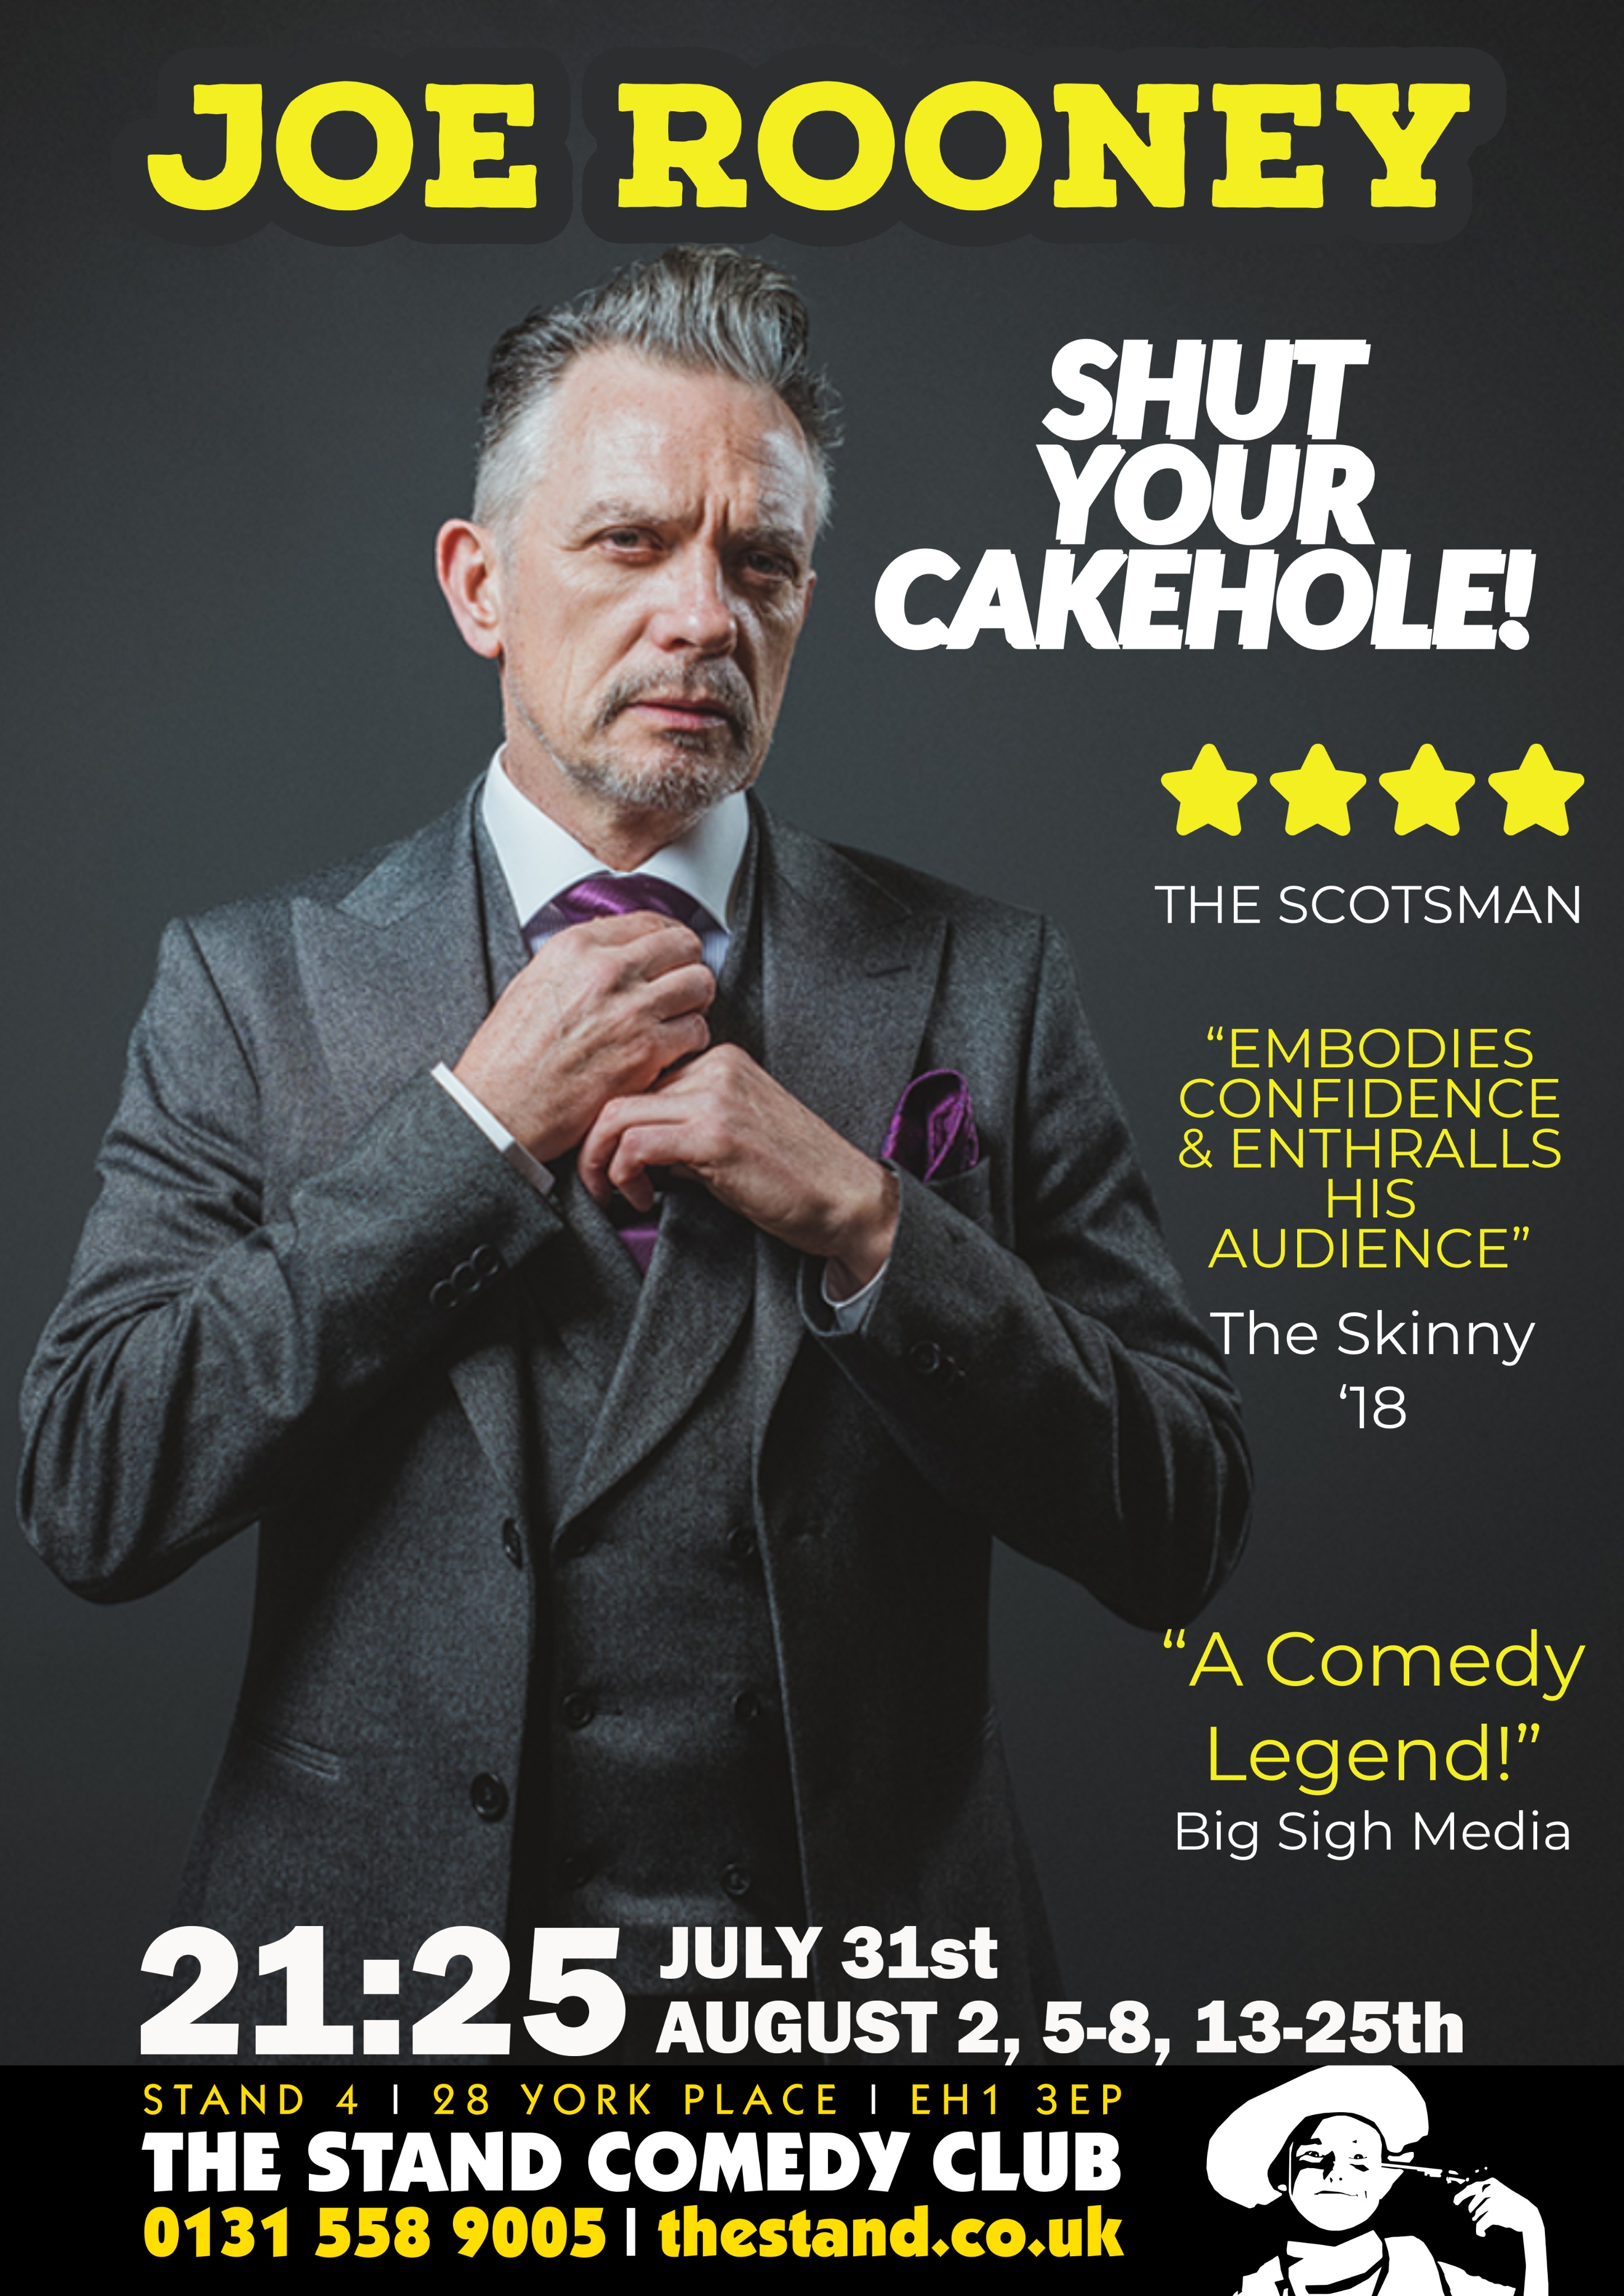 The poster for Joe Rooney: Shut Your Cakehole